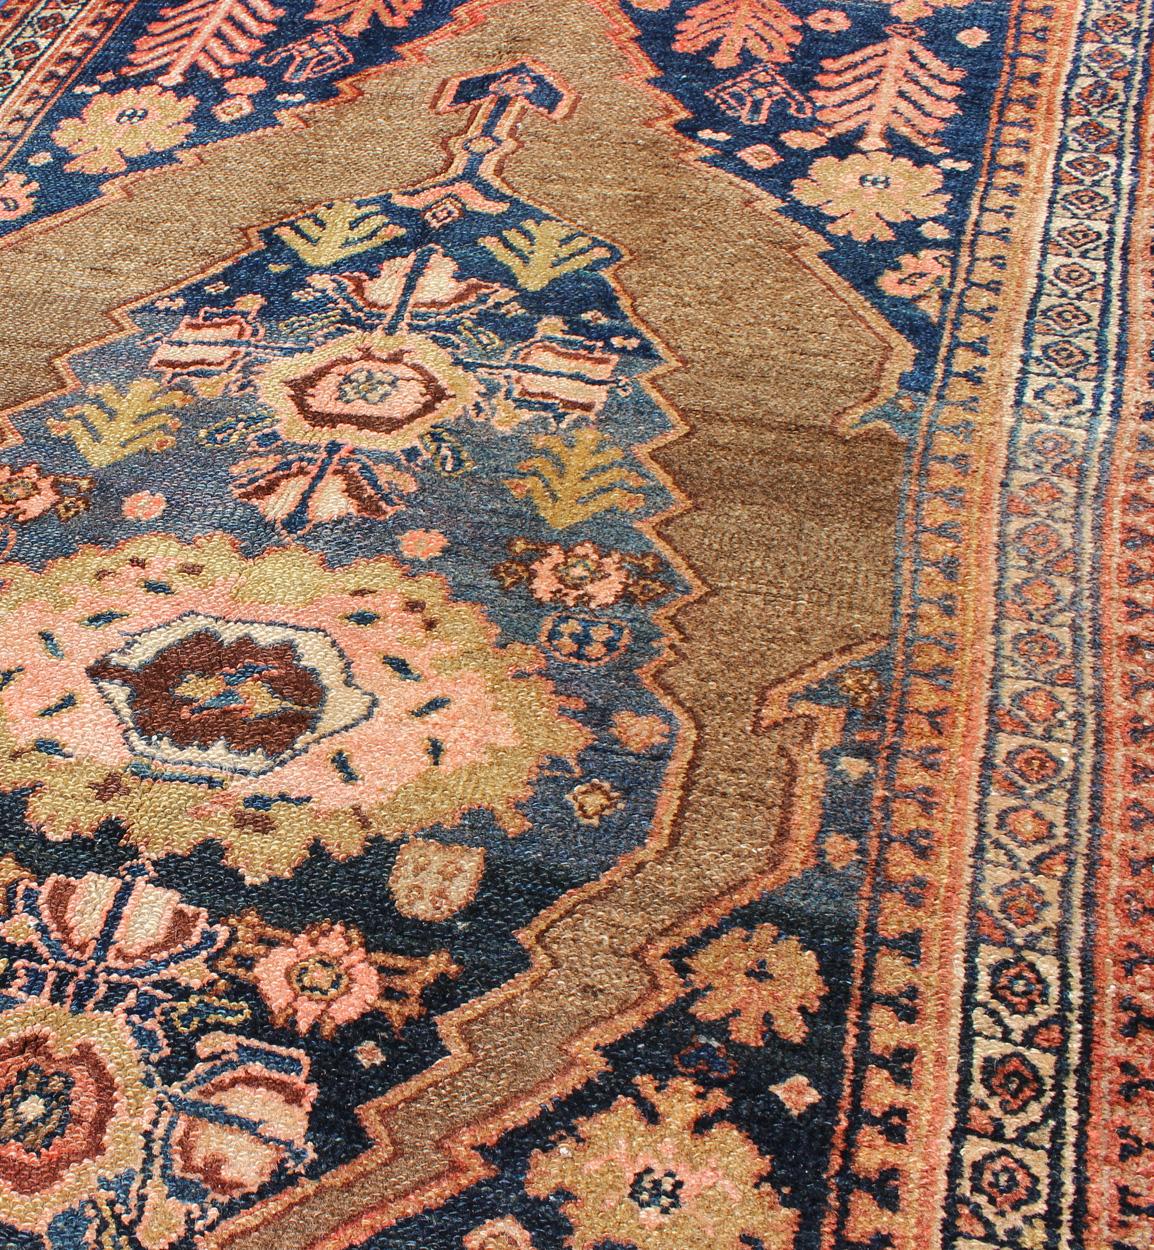 Tribal Medallion Design Antique Persian Serab Rug in Camel and Shades of Blue For Sale 3